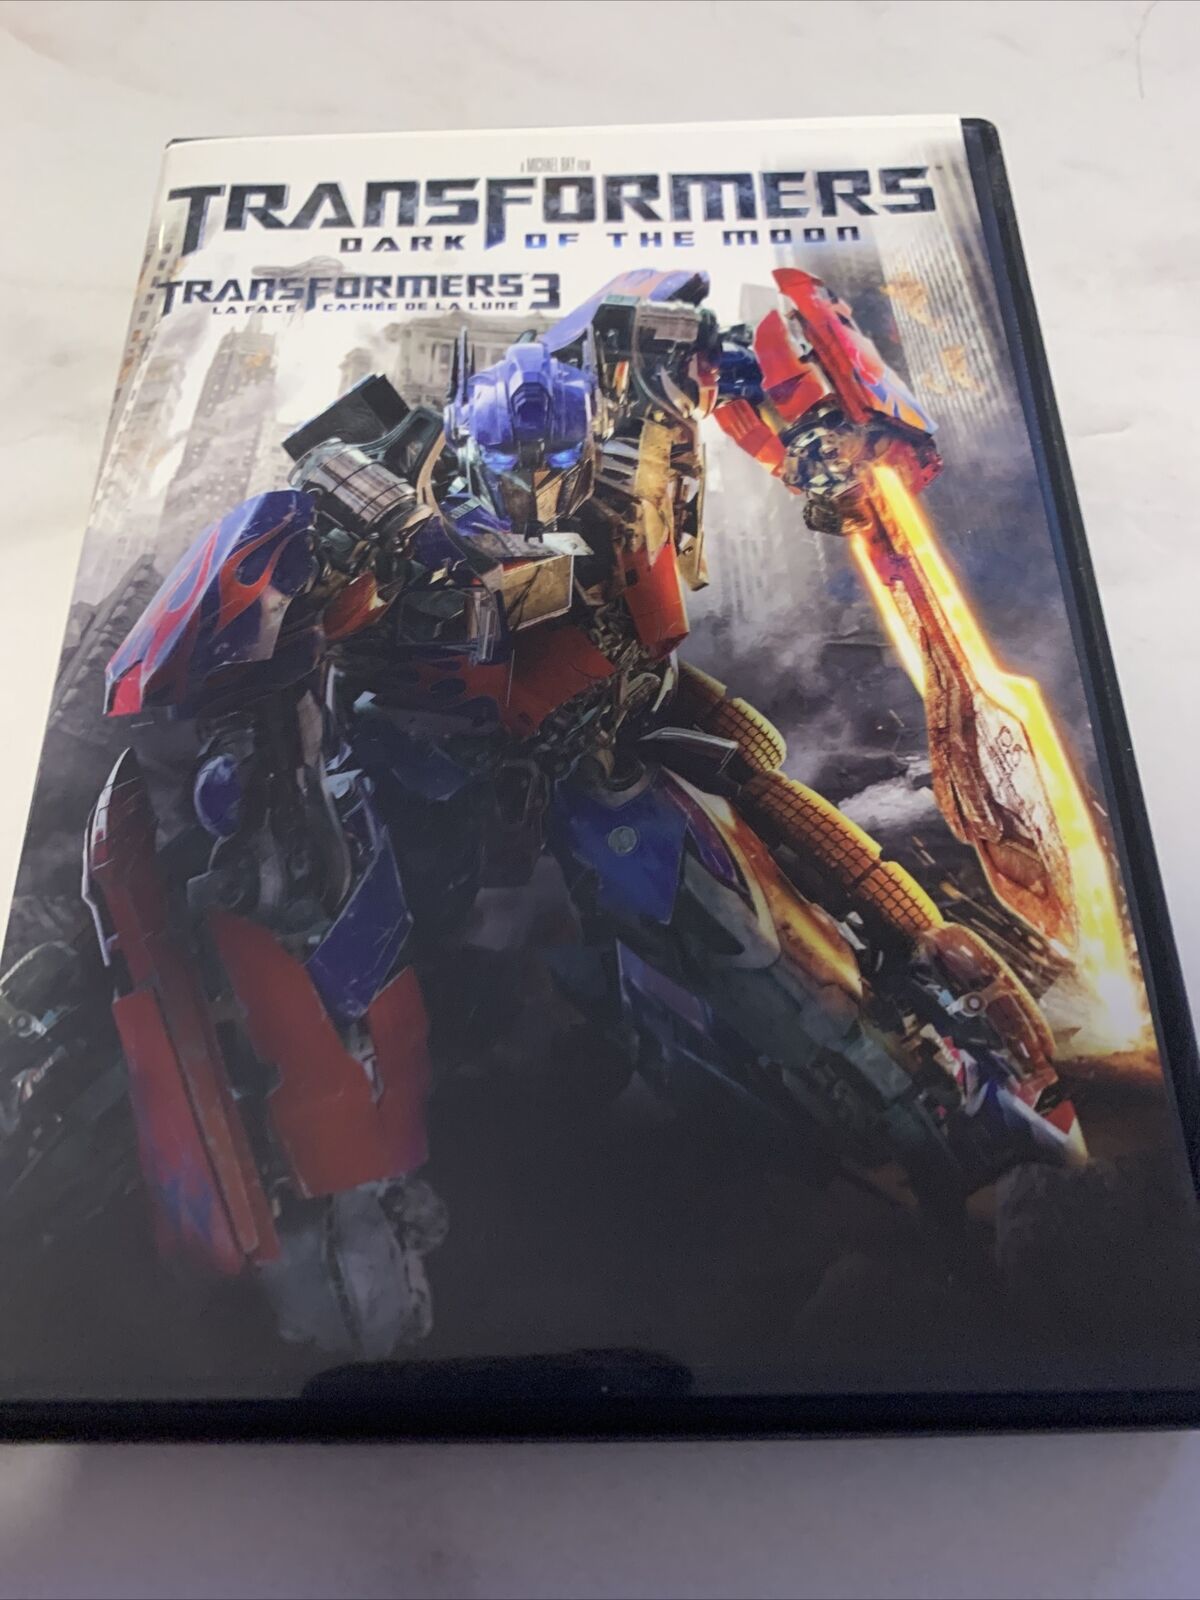 Transformers: Dark of the Moon (DVD, Canadian)